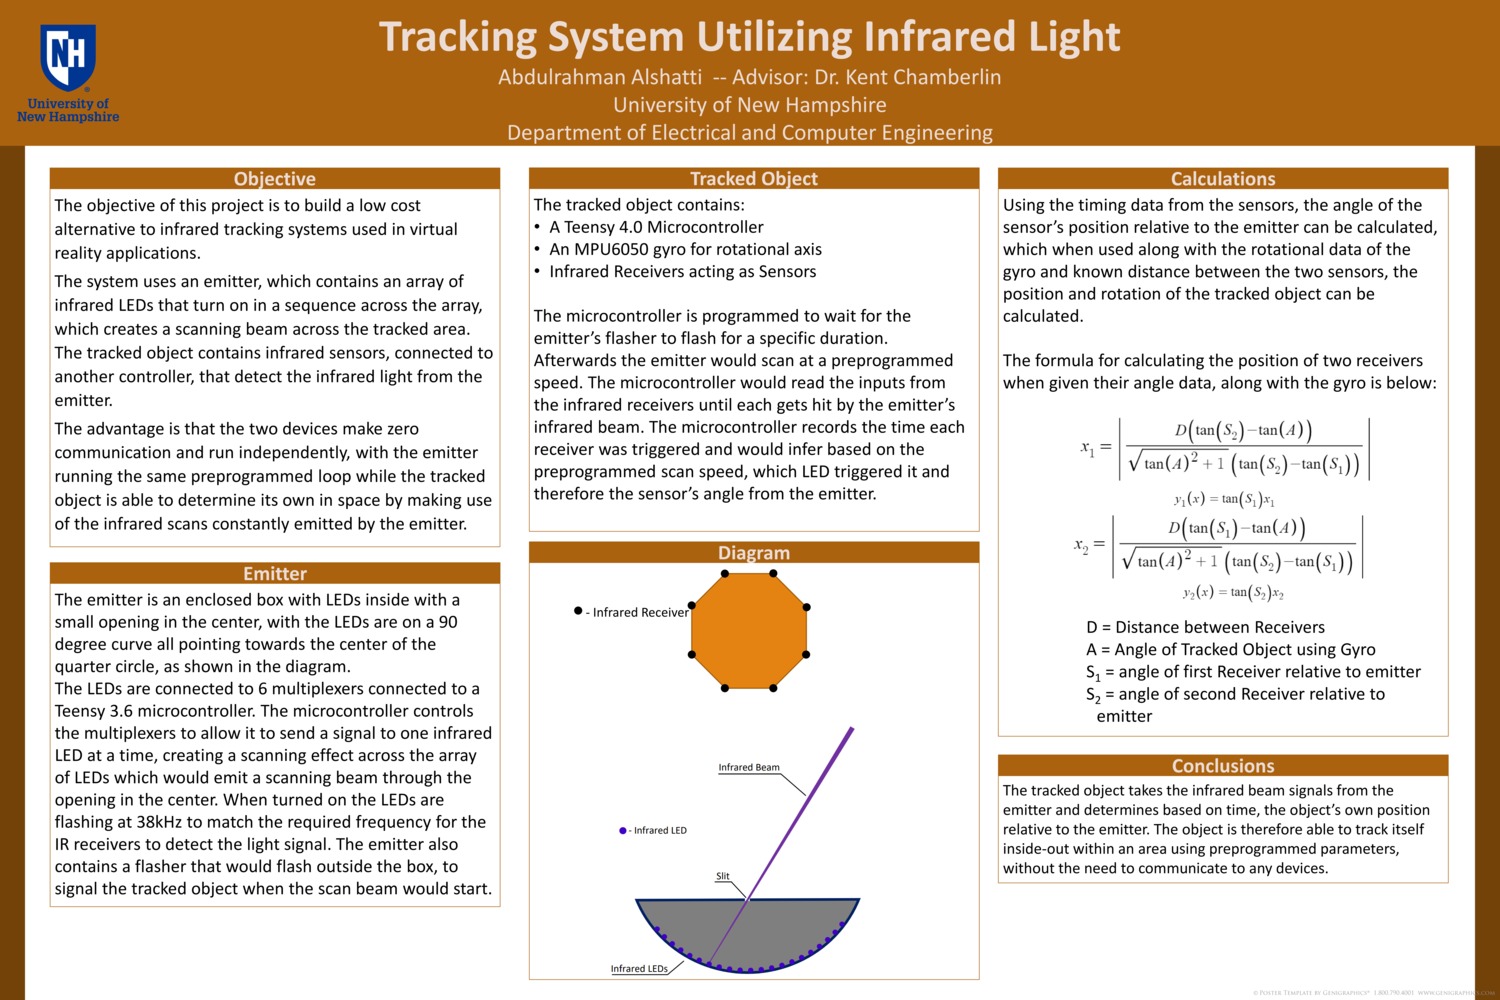 Tracking System Utilizing Infrared Light by Abdul